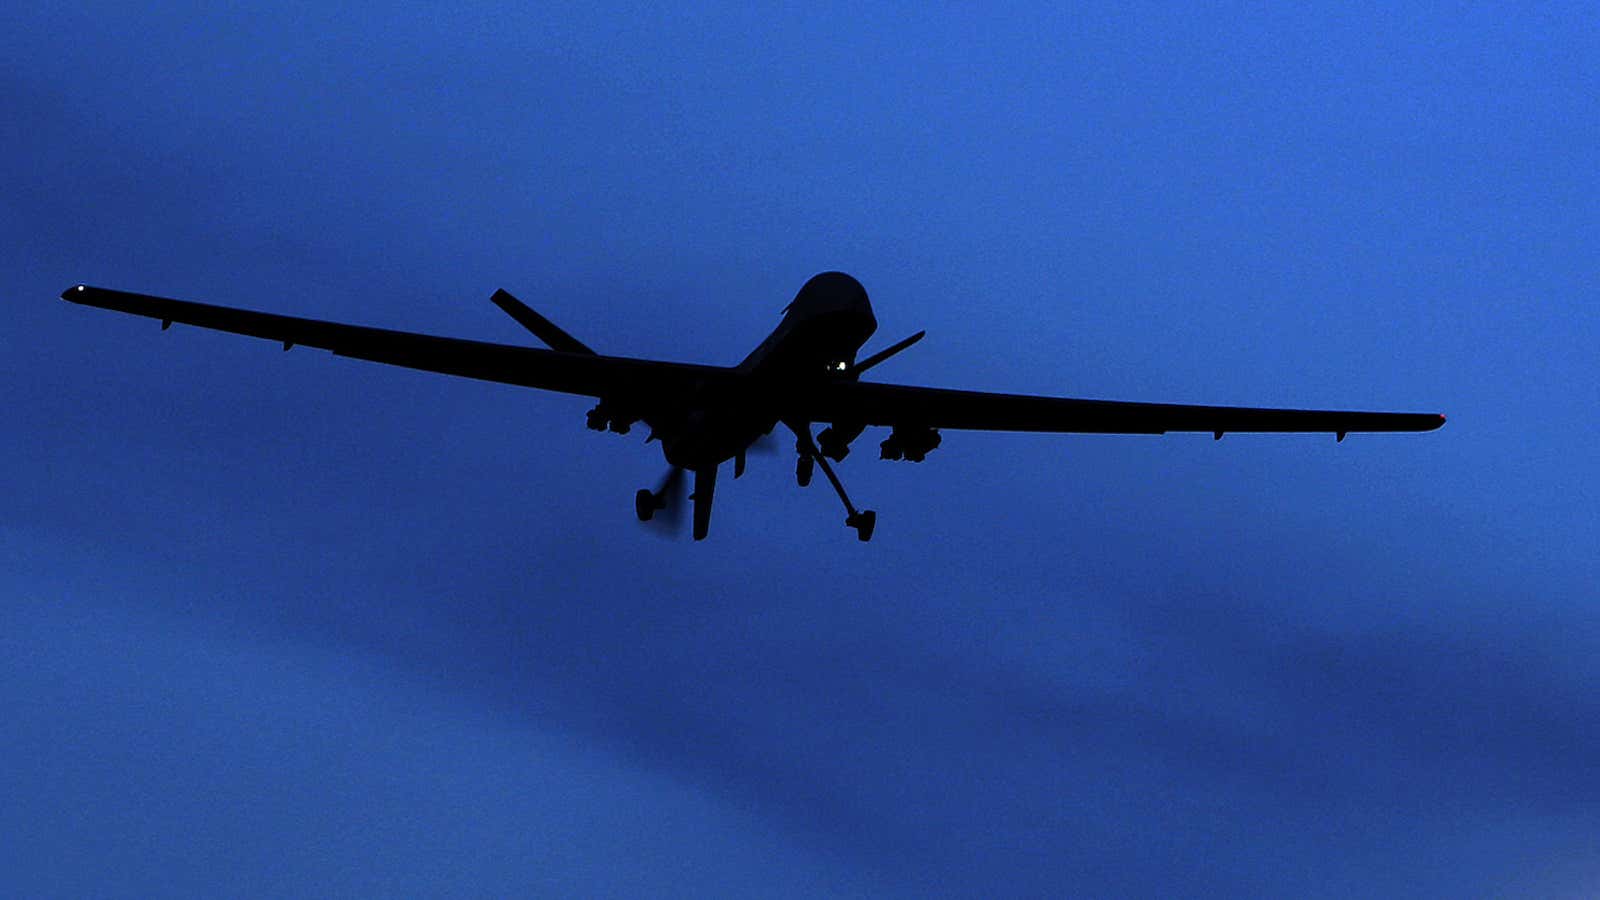 The US government has been tight-lipped about the details of its drone program.